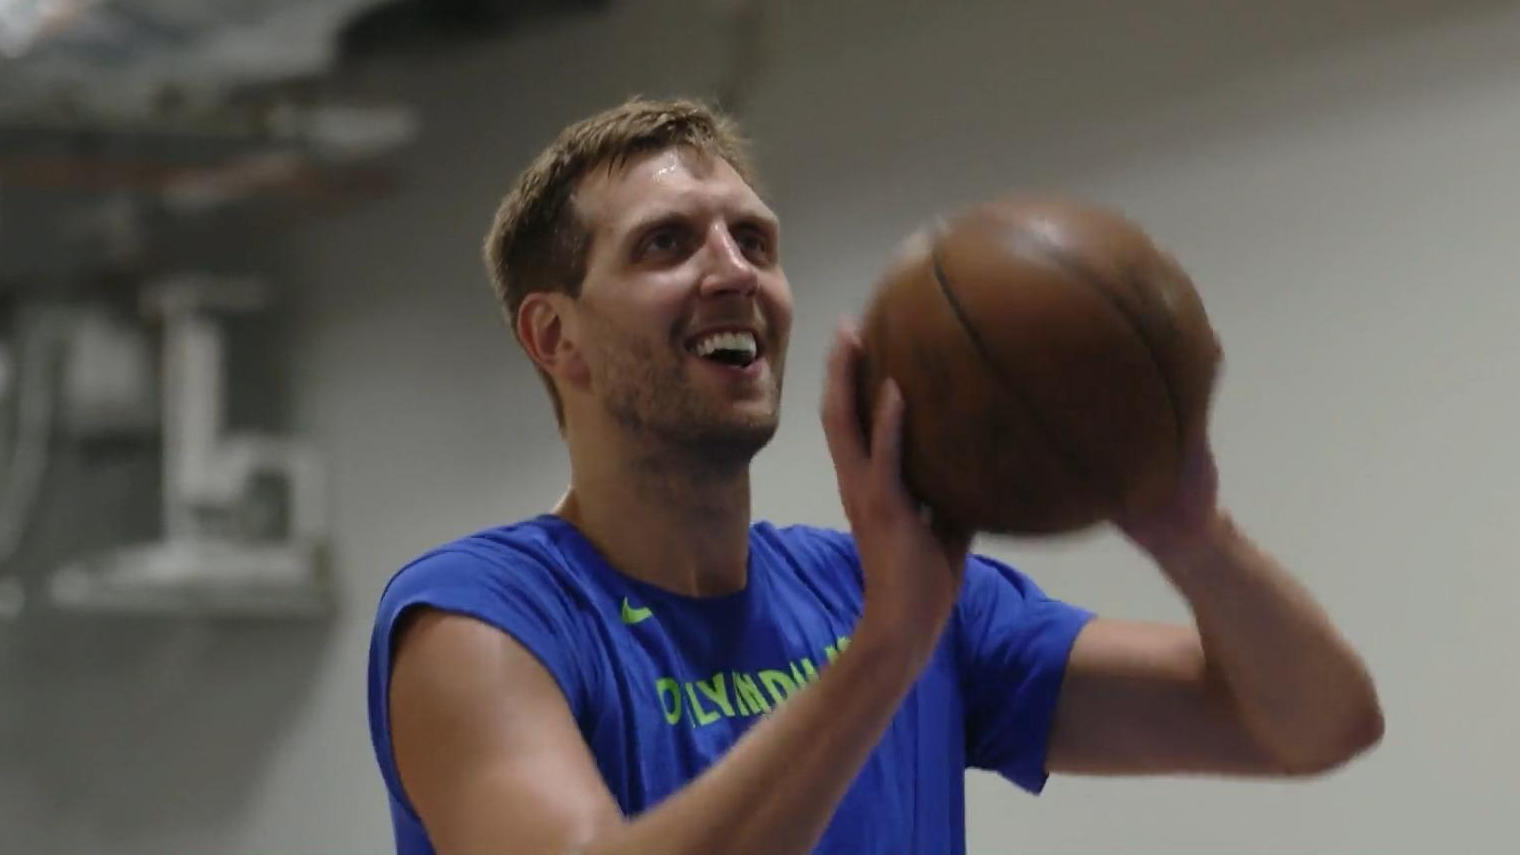 Dirk Nowitzki is new to the Hall of Fame Great honor for ex-NBA star